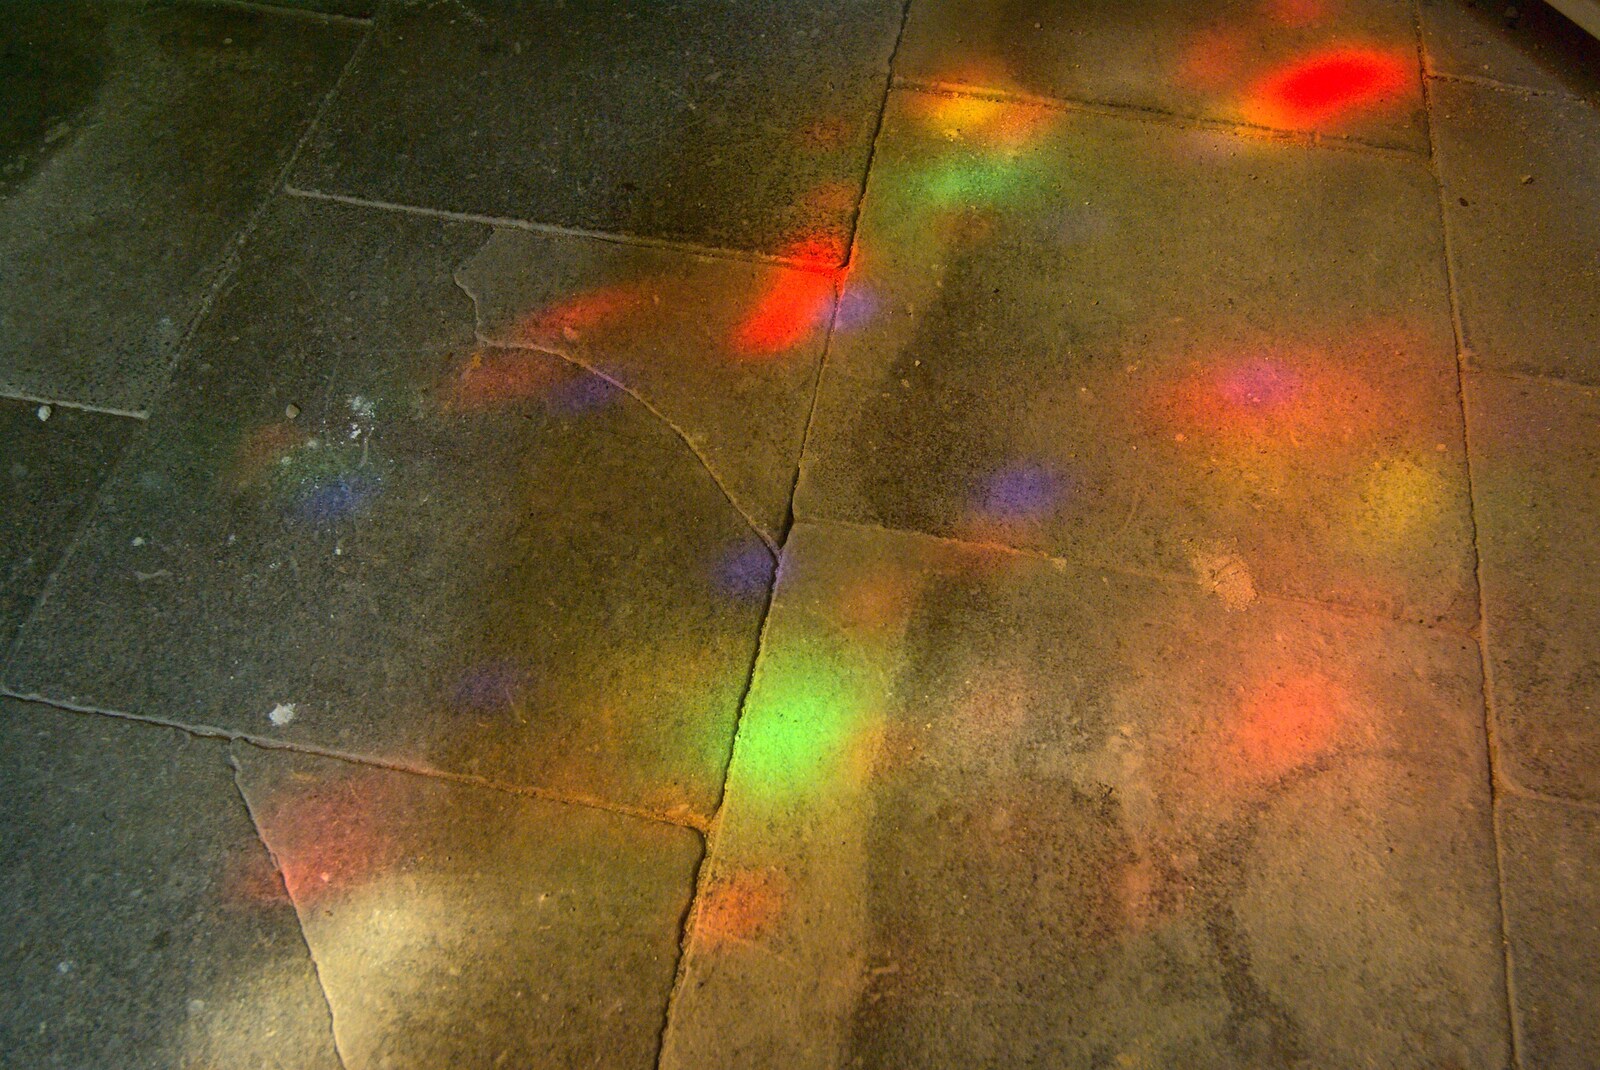 The floor is painted with light  from Charles and the Royal Wedding, Brome, Suffolk - 24th April 2011